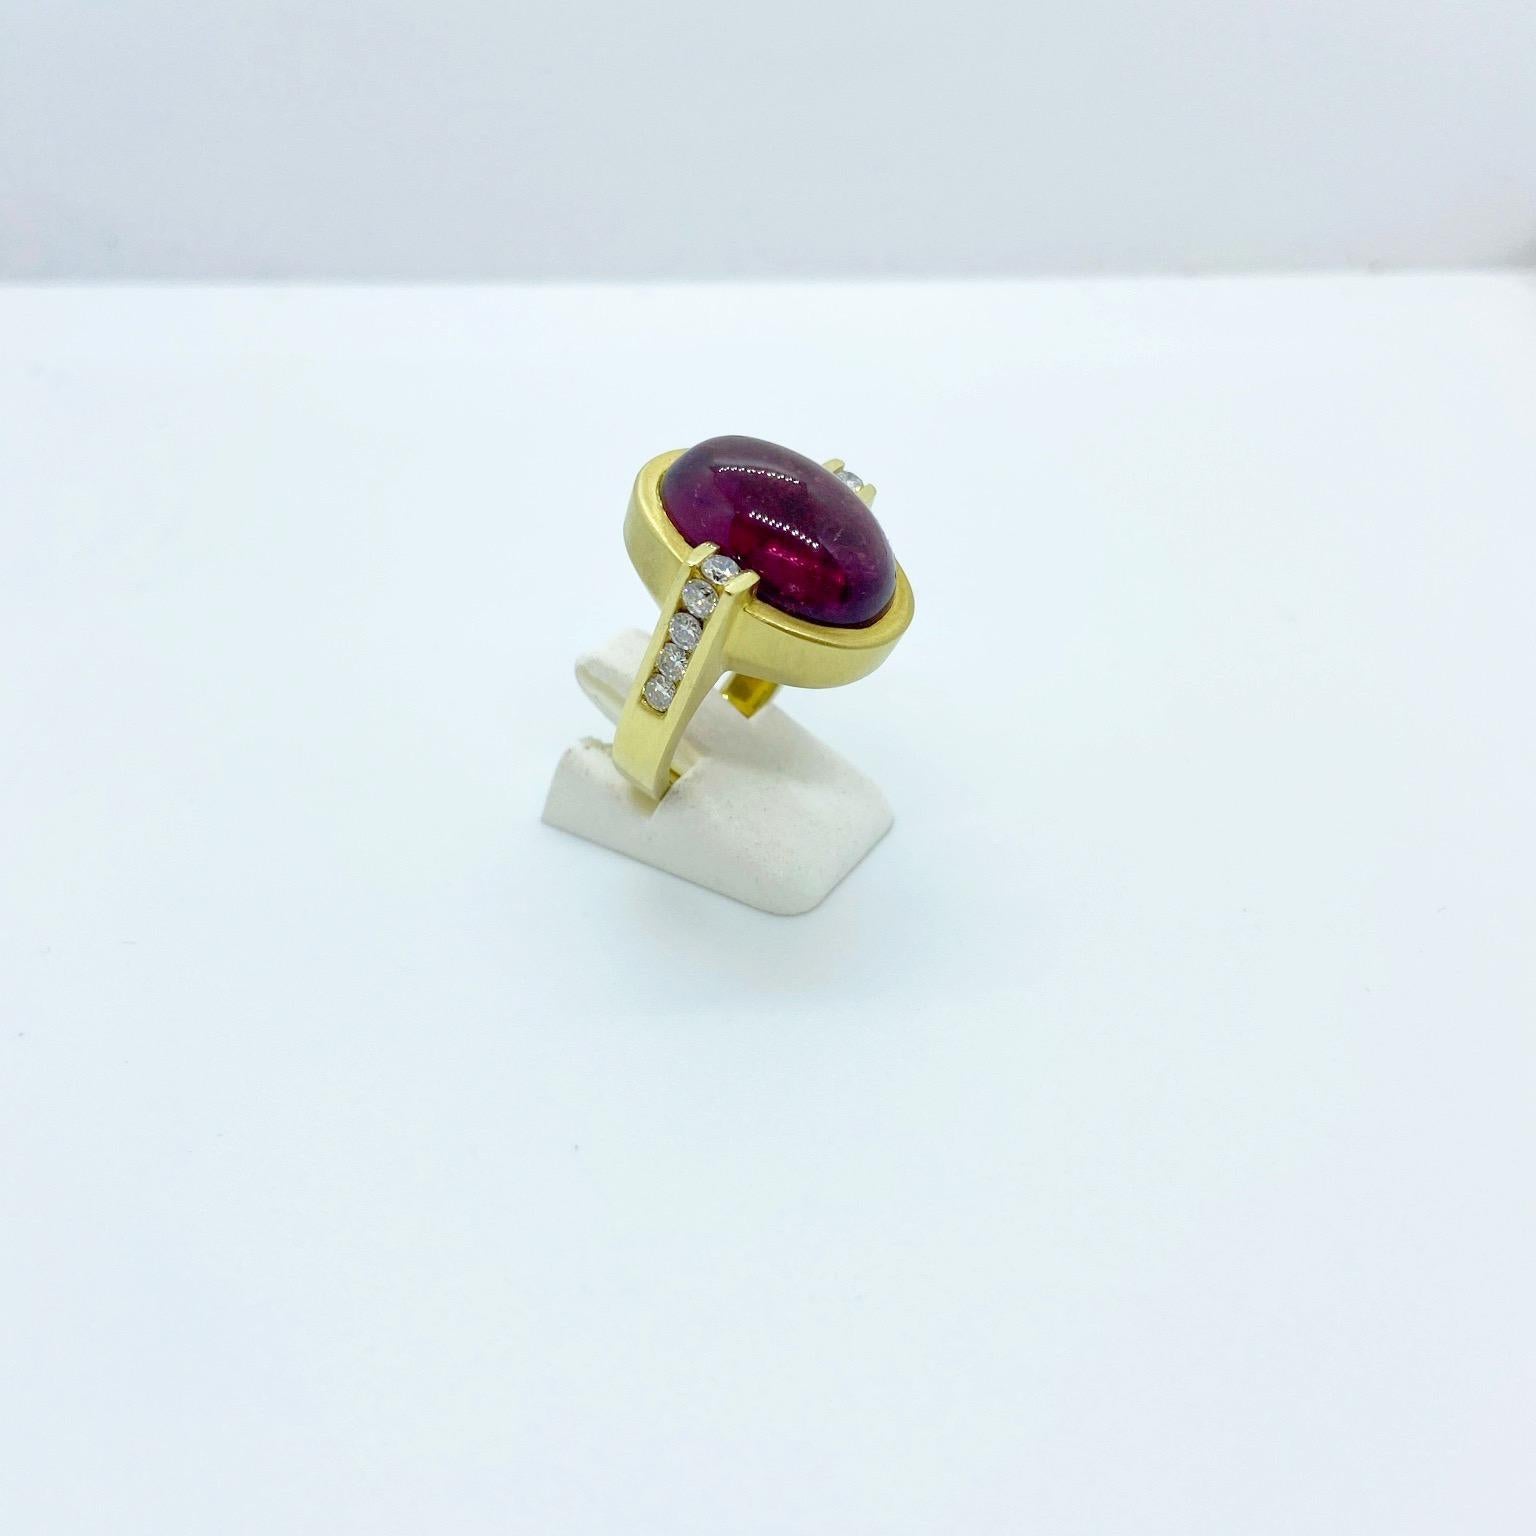 The centerpiece of this ring is the large oval rubelite stone. The 18 karat yellow gold setting is a combination of a matte and shiny finish. Ten round brilliant diamonds 0.65 carats accent the center stone.
Ring size 6  sizing options may be